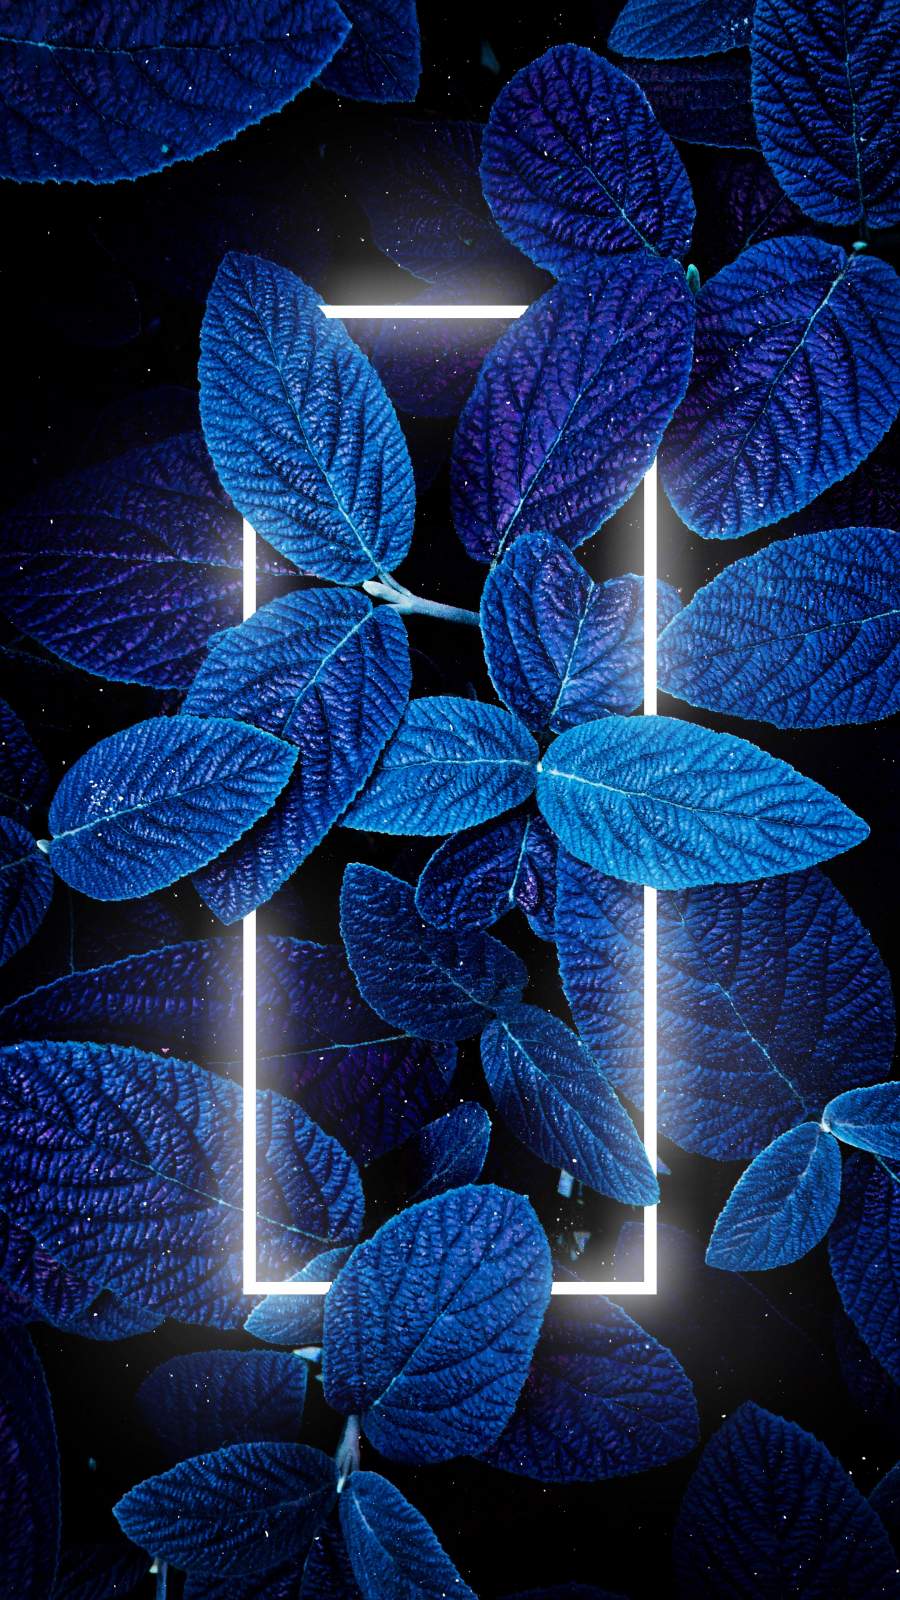 Neon Blue Nature - IPhone Wallpapers : iPhone Wallpapers